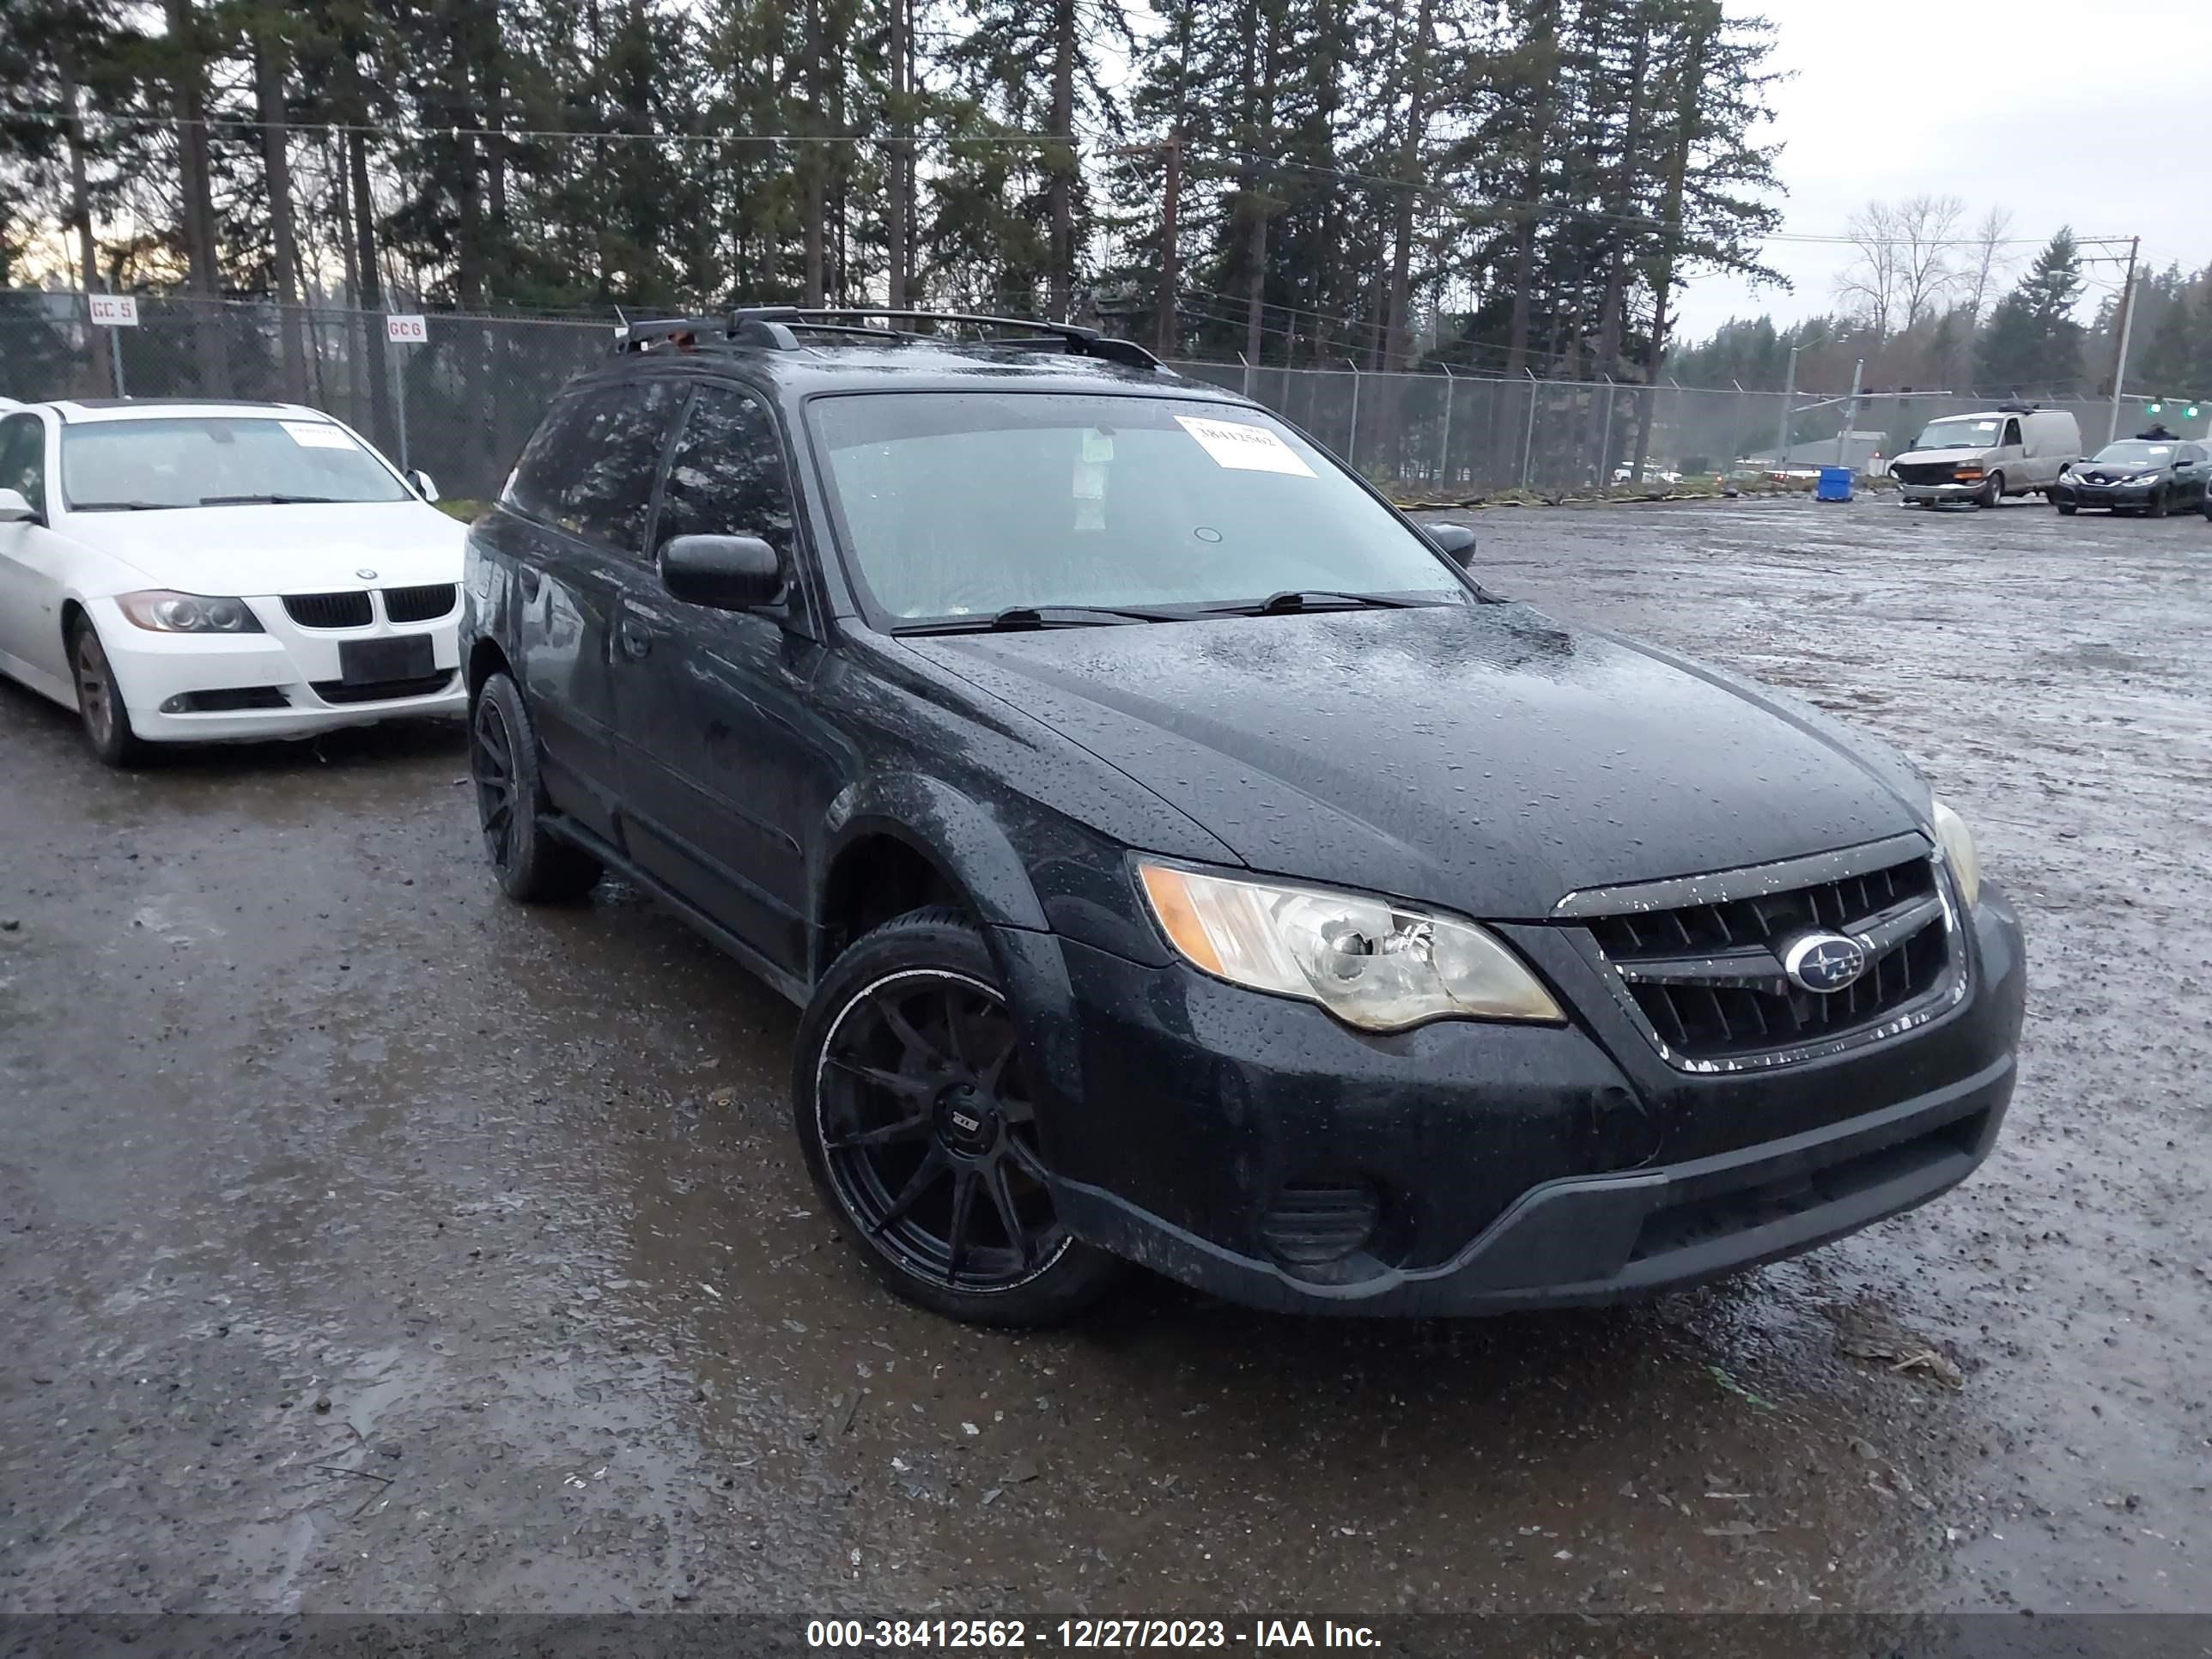 vin: 4S4BP60C987338545 4S4BP60C987338545 2008 subaru outback 2500 for Sale in 98374, 15801 110Th Ave E, Puyallup, USA